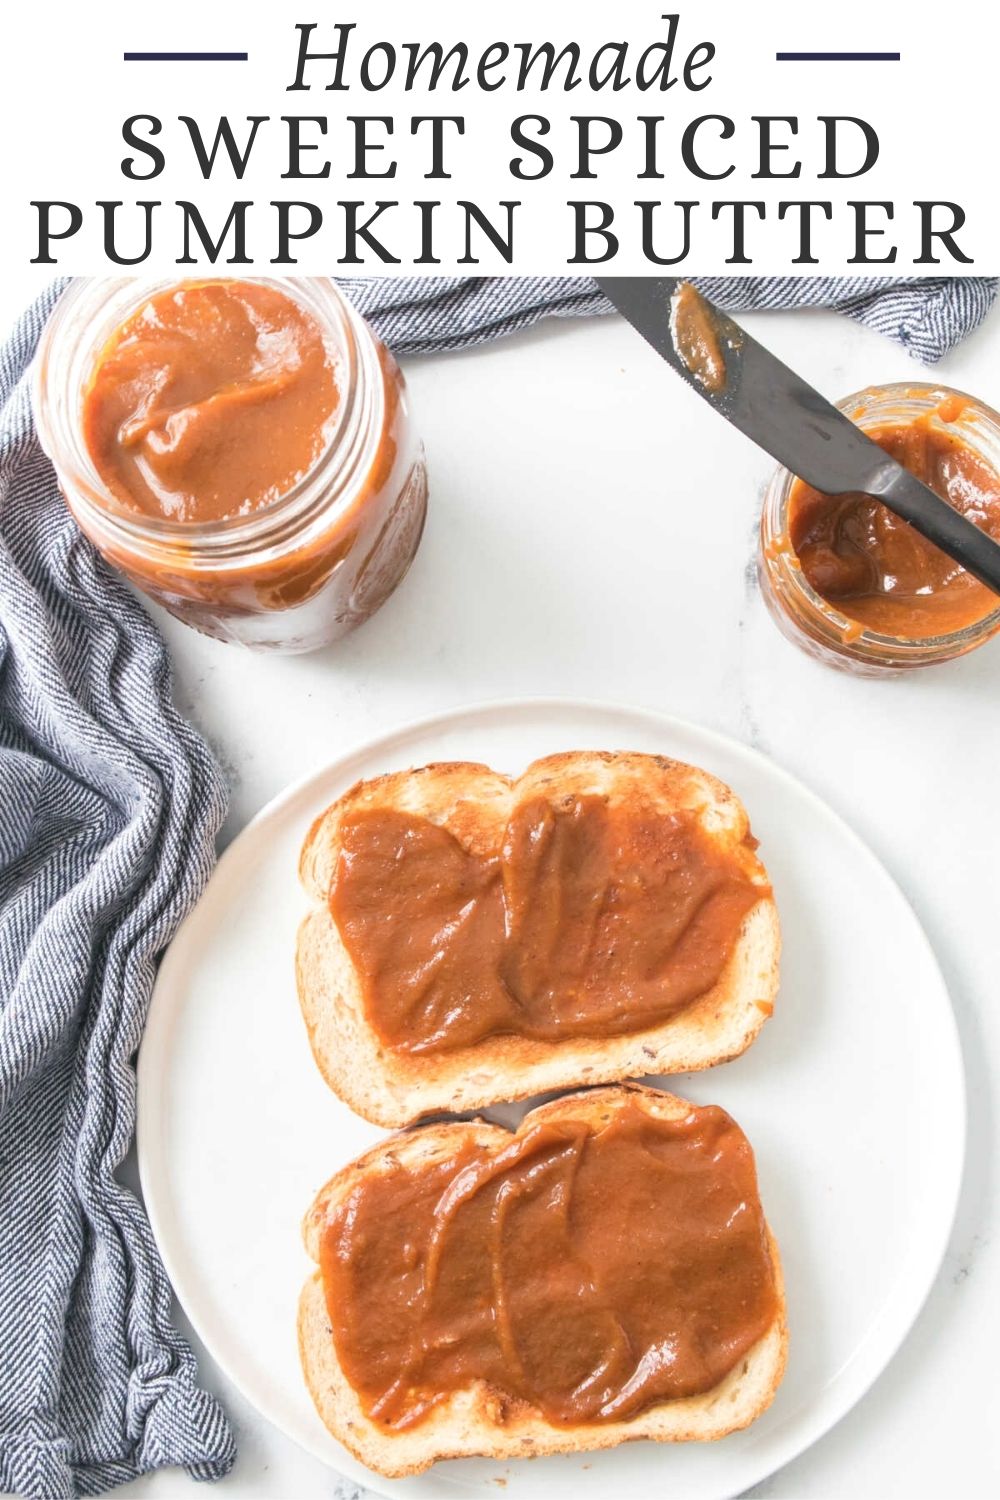 This pumpkin butter recipe is a perfect way for pumpkin lovers to enjoy pumpkin all day long. Spread it on toast, stir it into yogurt or bake it into desserts. It makes a great gift too, just put it in a pretty jar and it's ready to go.